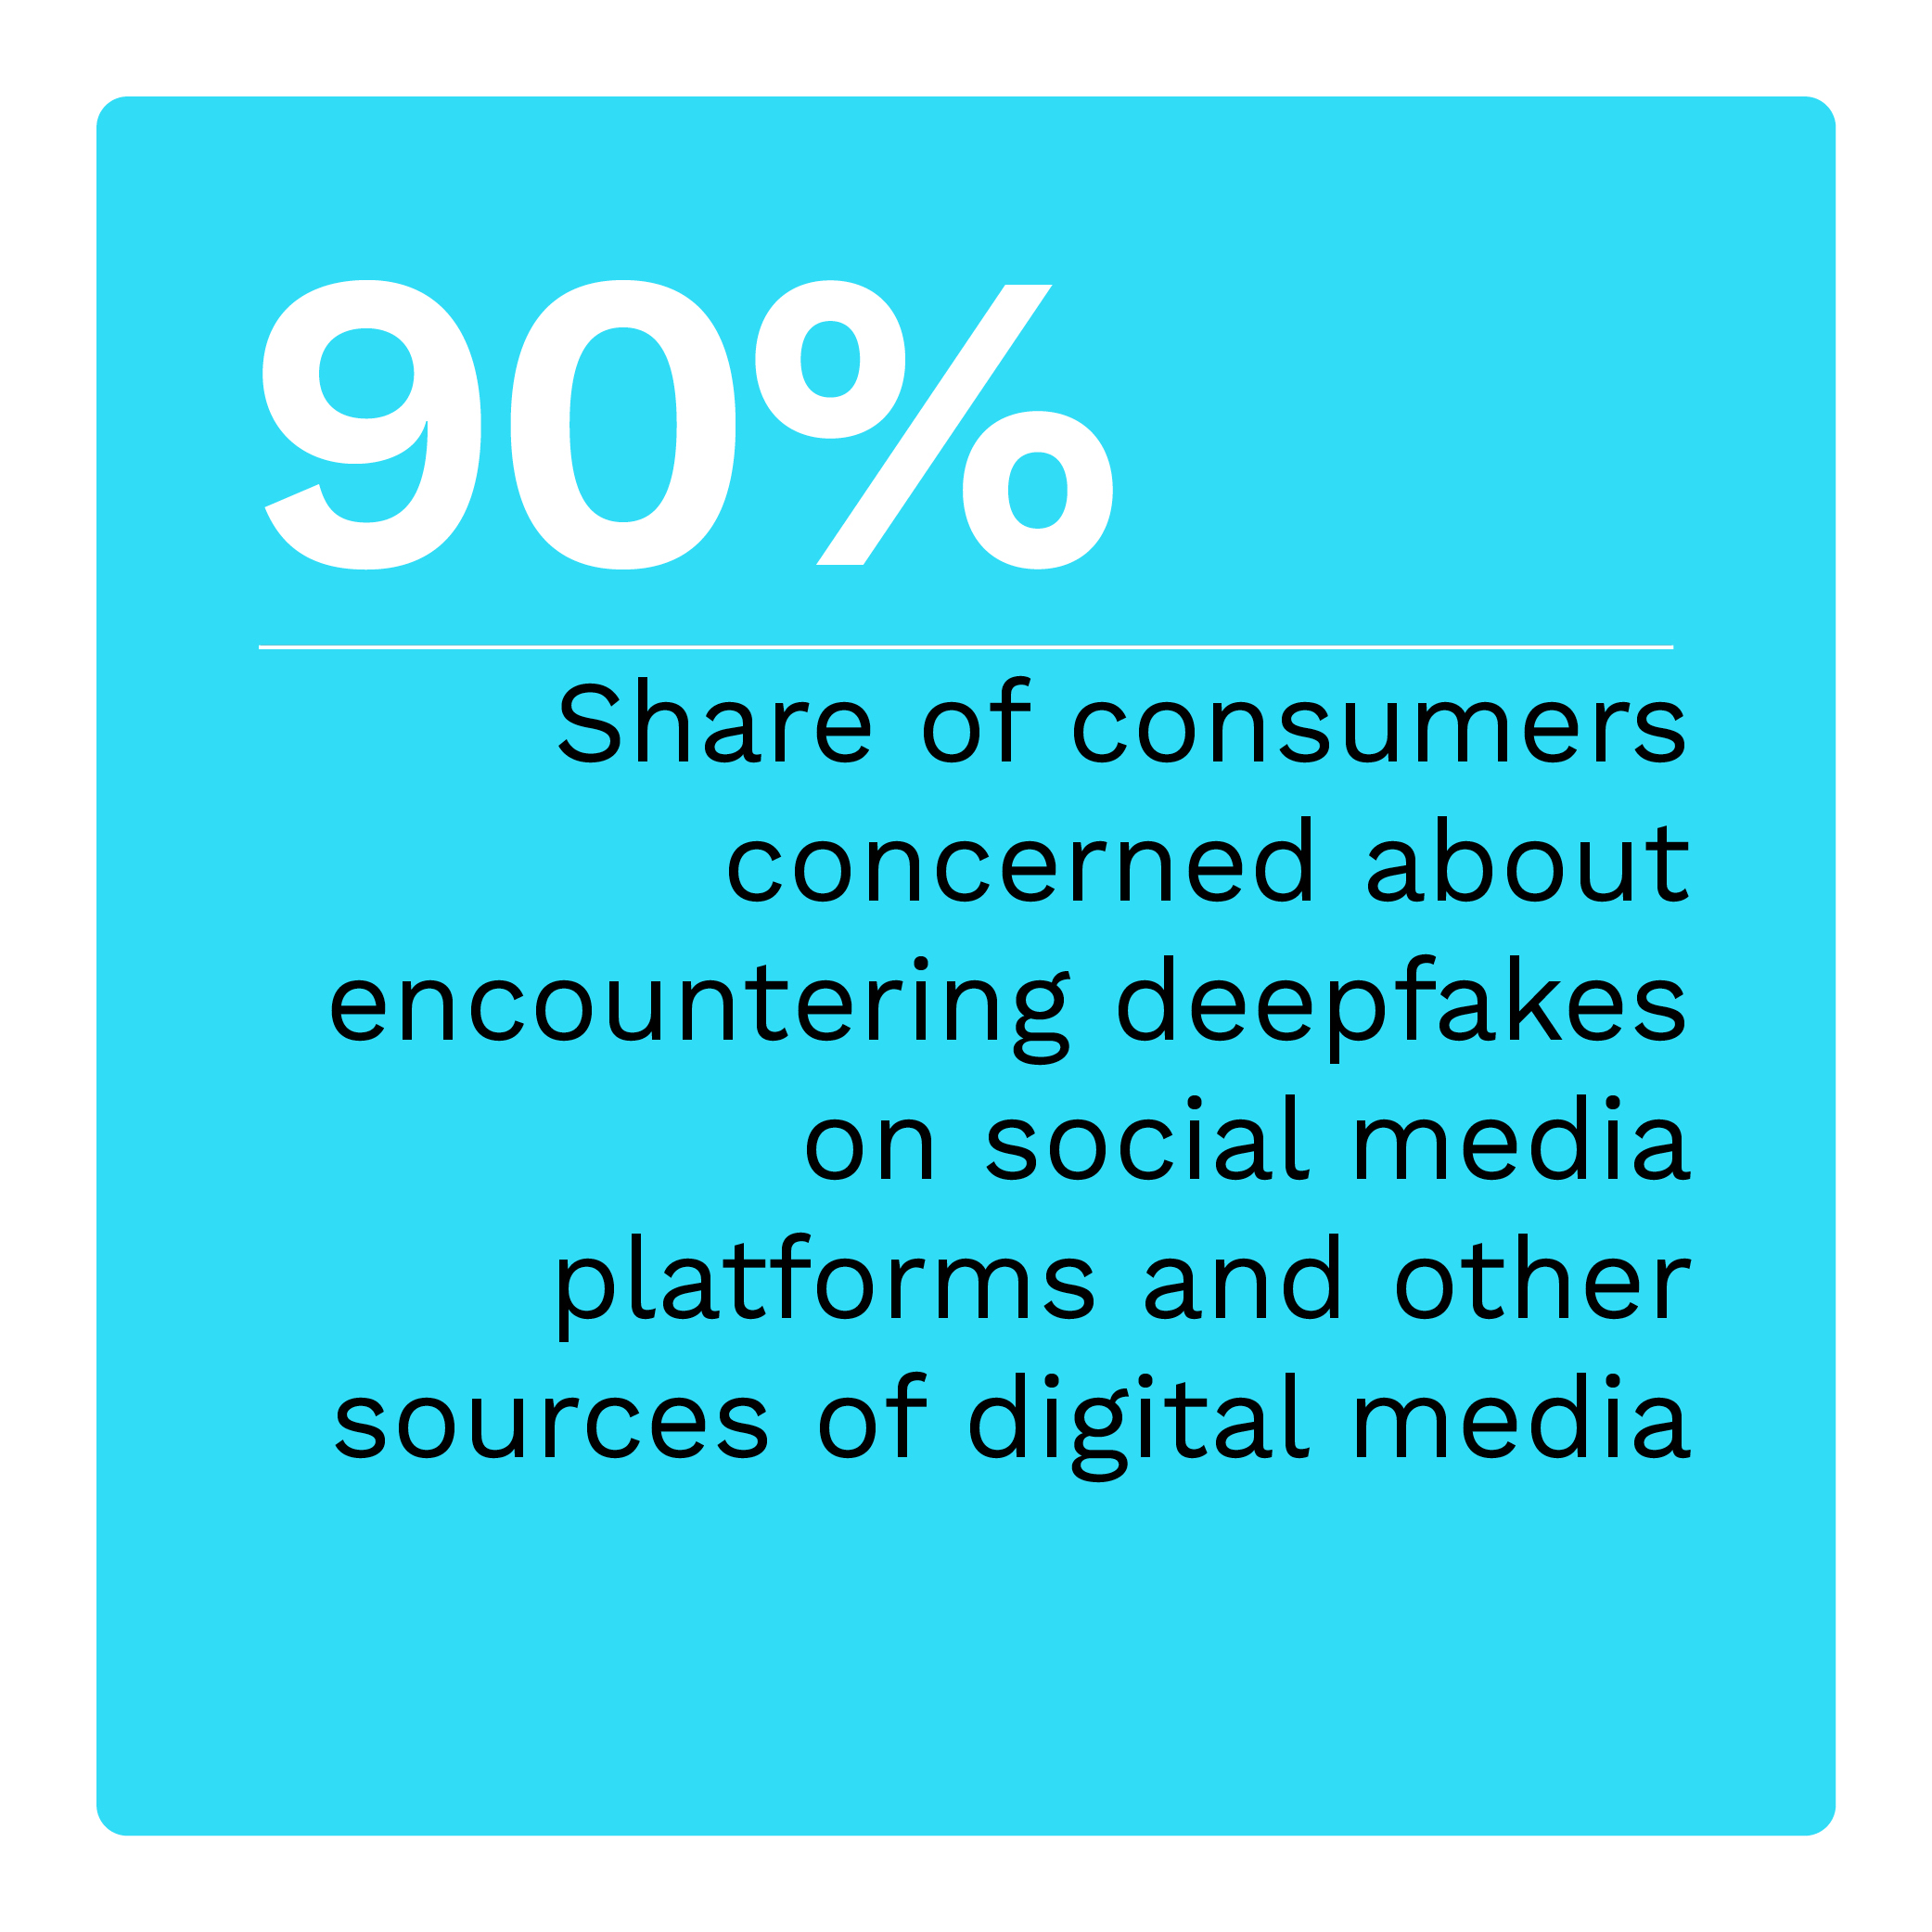  Share of consumers concerned about encountering deepfakes on social media platforms and other sources of digital media